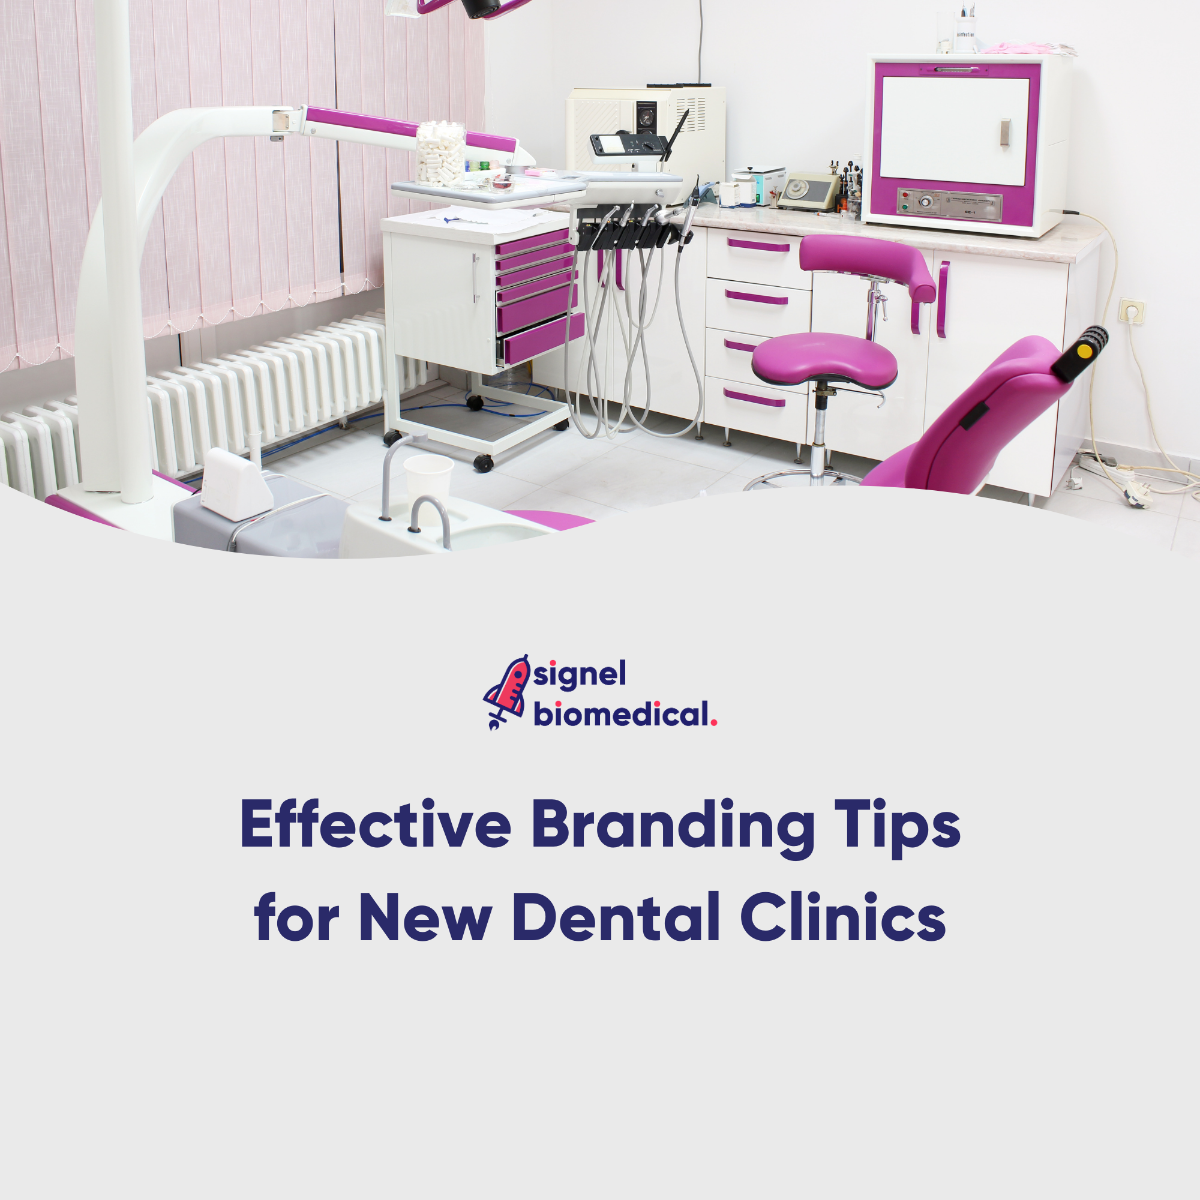 Building a brand for your dental practice